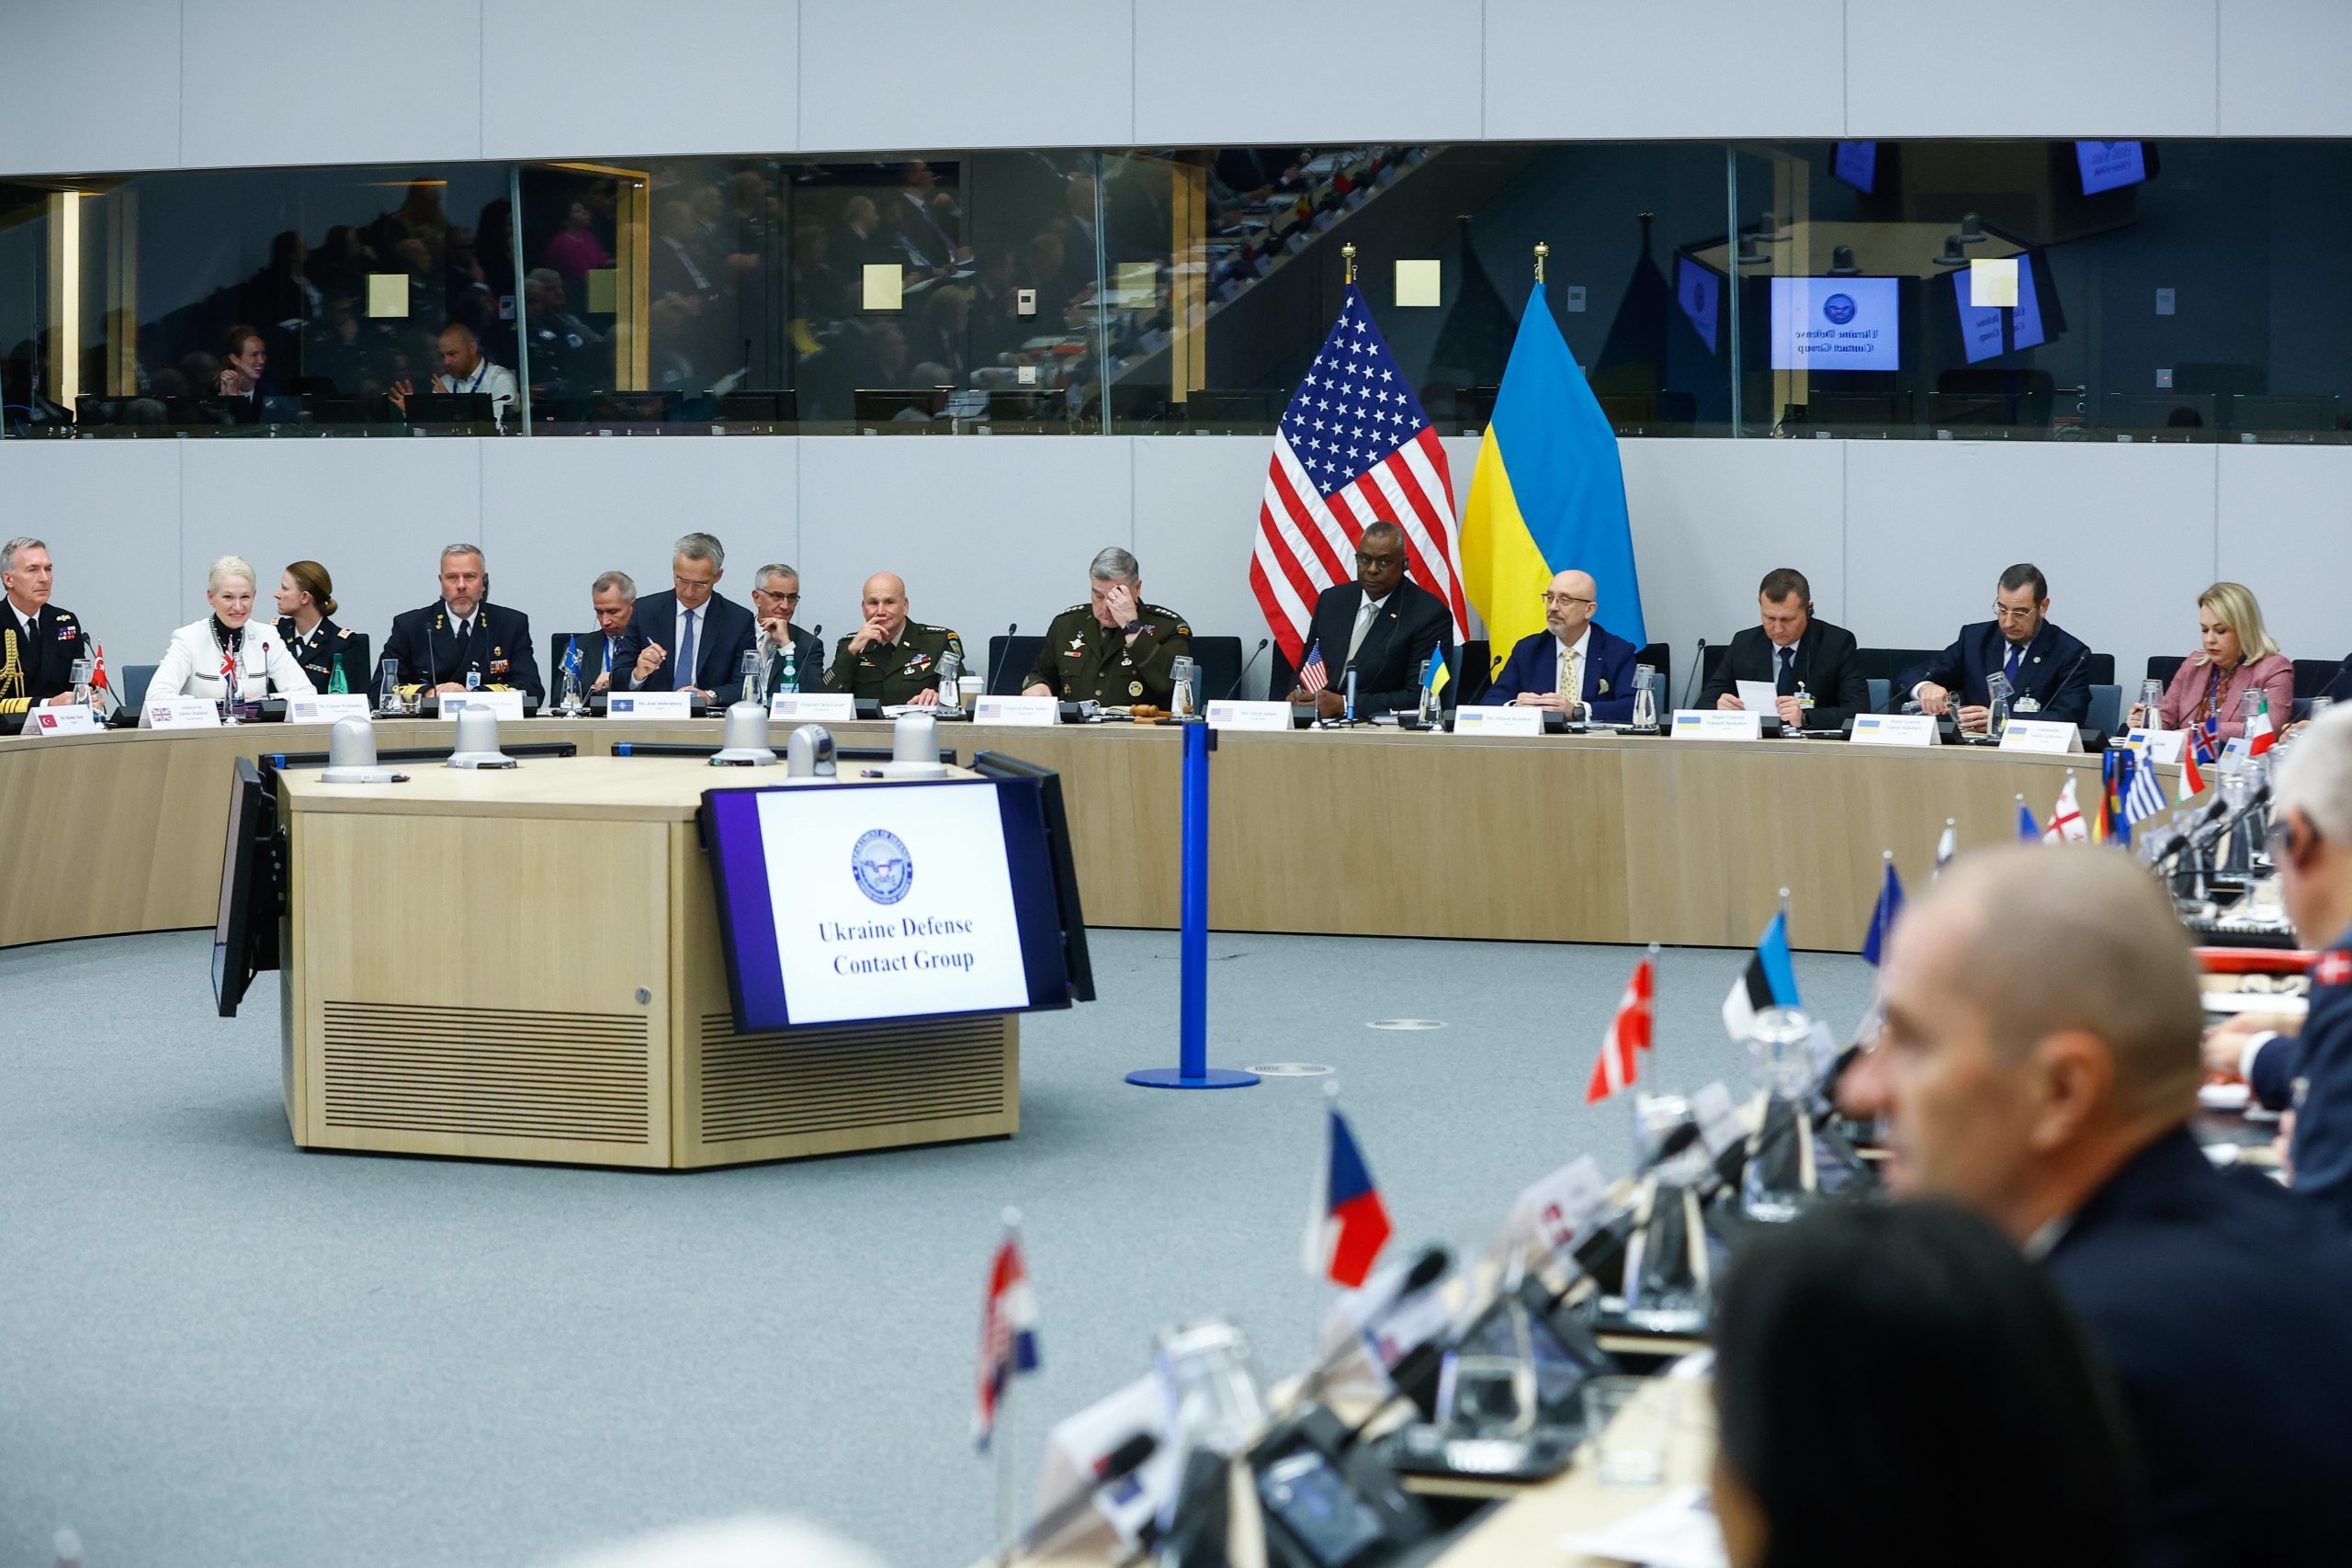 epa10238524 A view of the meeting room at the start of a Meeting of the Ukraine Defense contact group, as part of a NATO Council Defense Ministers at the Alliance headquarters in Brussels, Belgium, 12 October 2022. Meetings of the North Atlantic Council (NAC) at the level of Defence Ministers will be held at the NATO Headquarters on 12 and 13 October 2022.  EPA/STEPHANIE LECOCQ